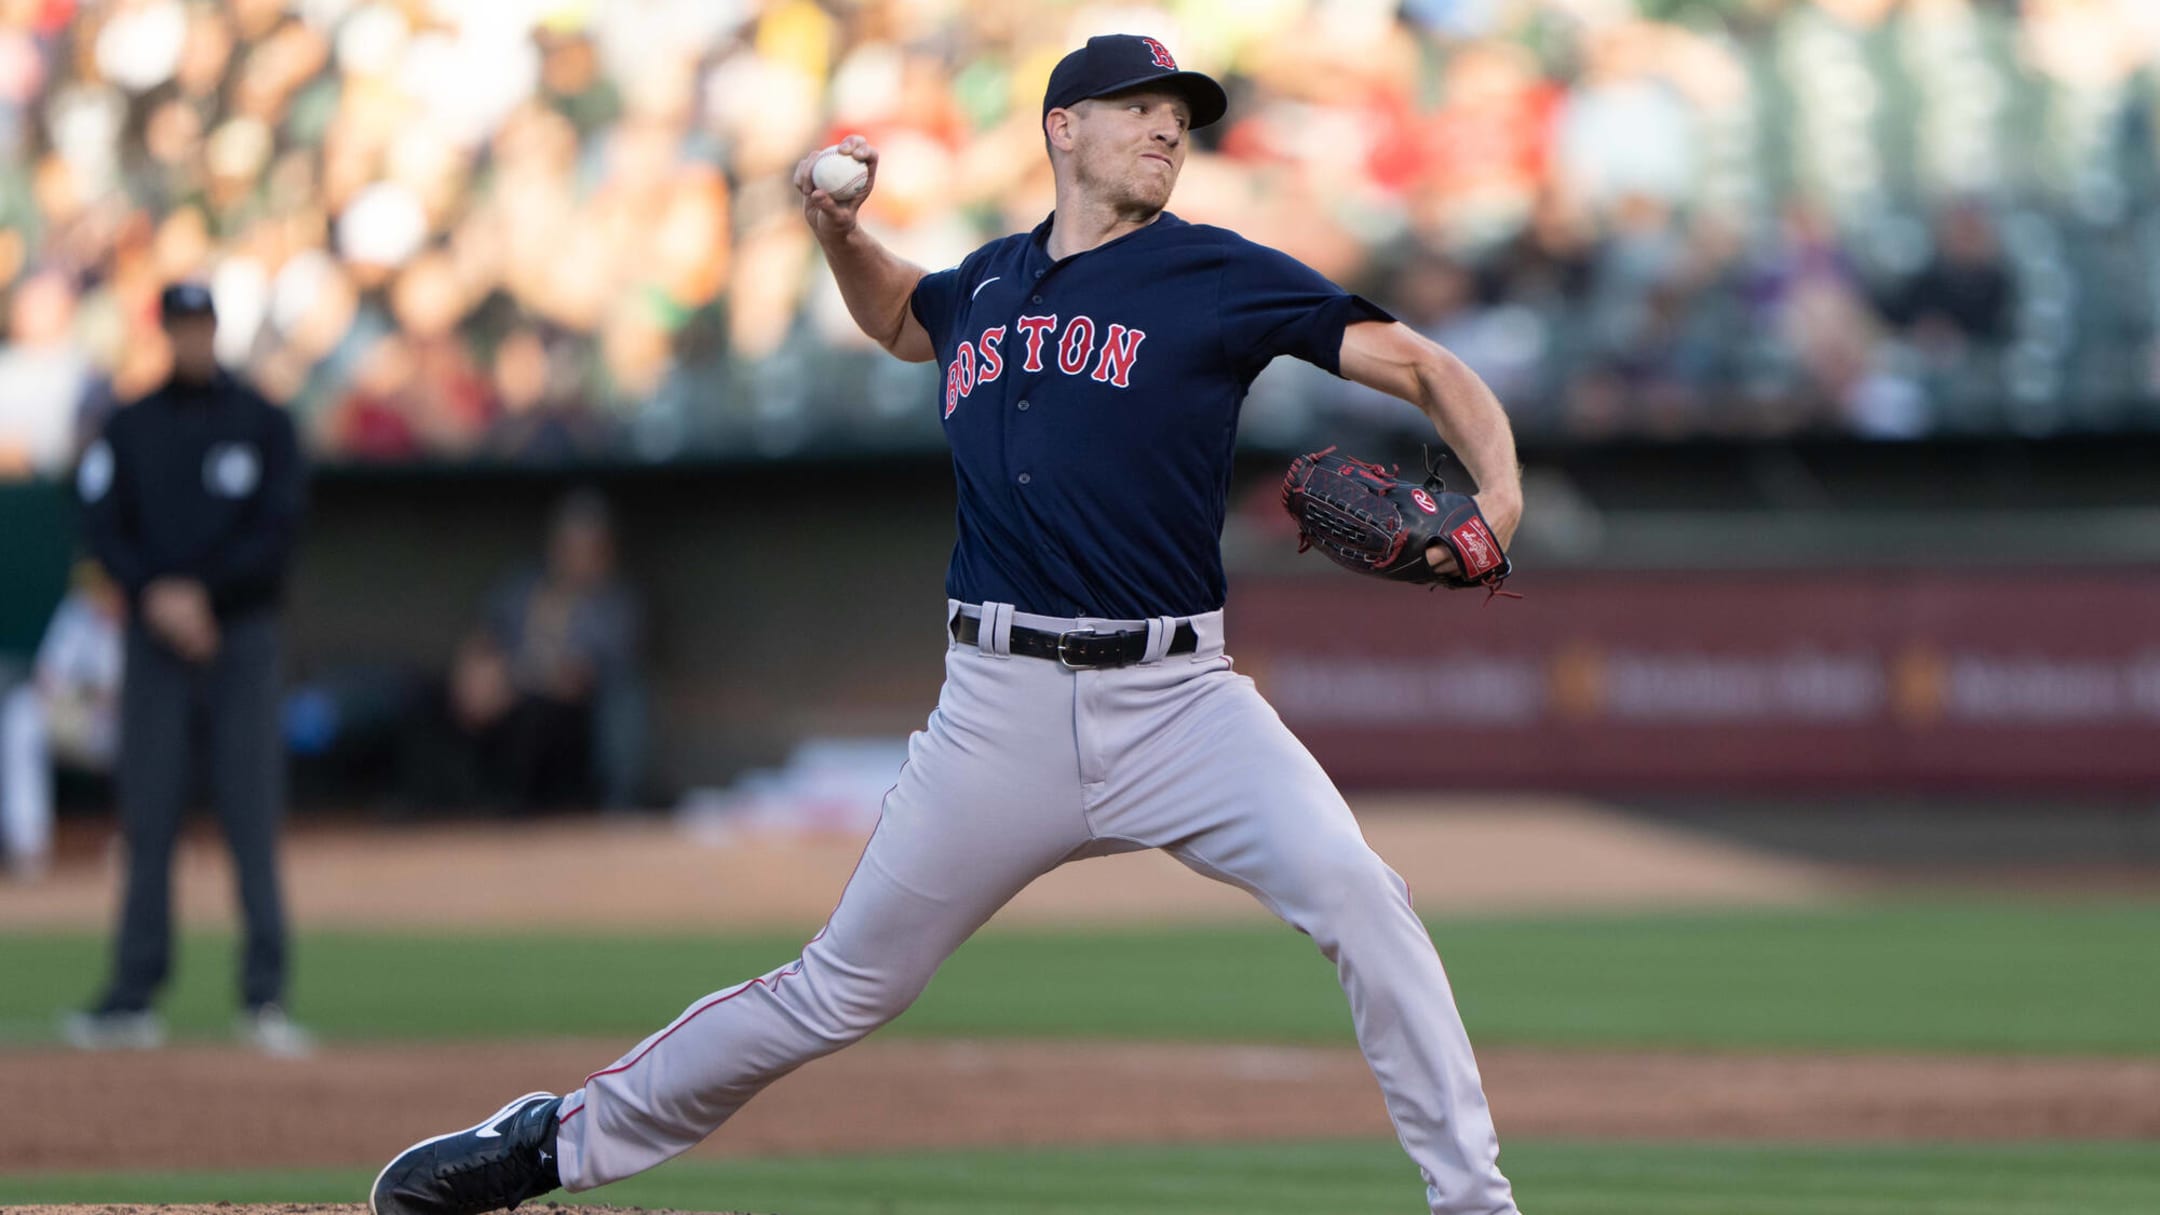 Red Sox move Nick Pivetta to bullpen after rocky start